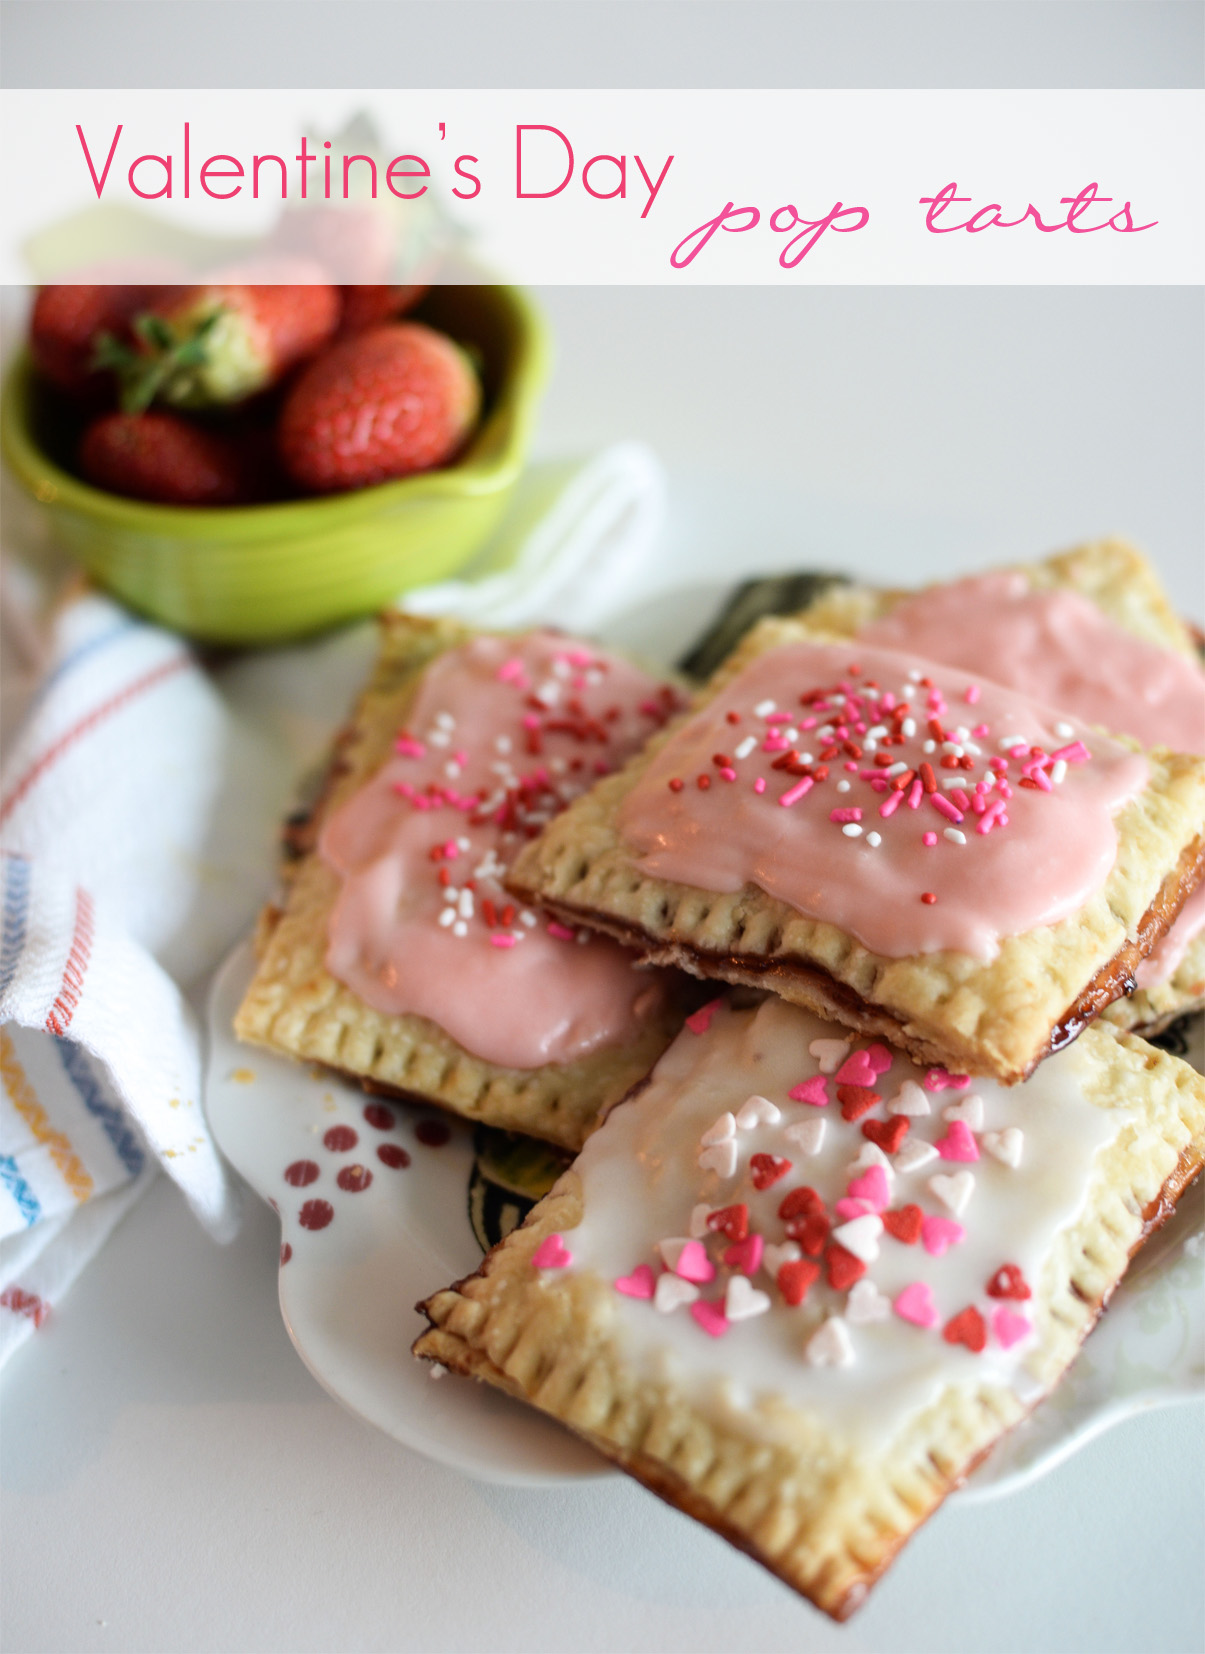 Home made pop tarts with a Valentine's Day twist